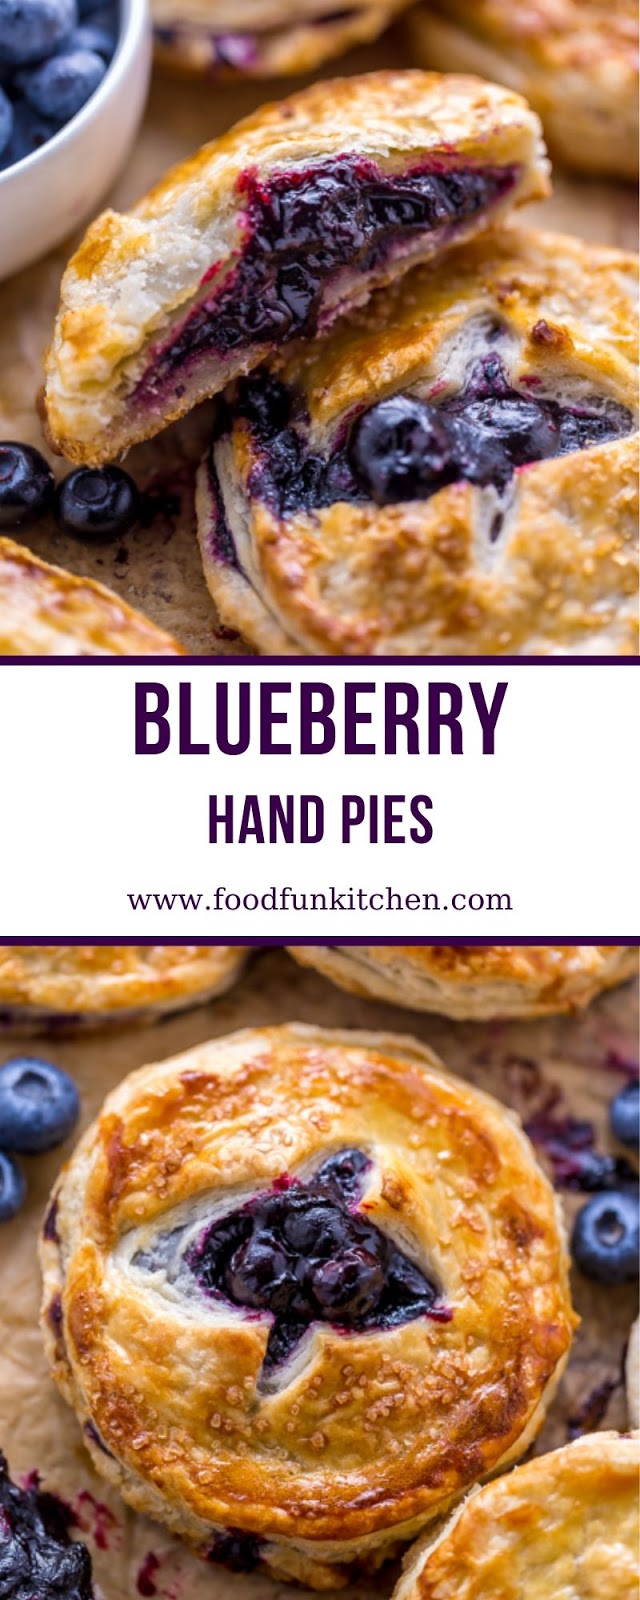 BLUEBERRY HAND PIES